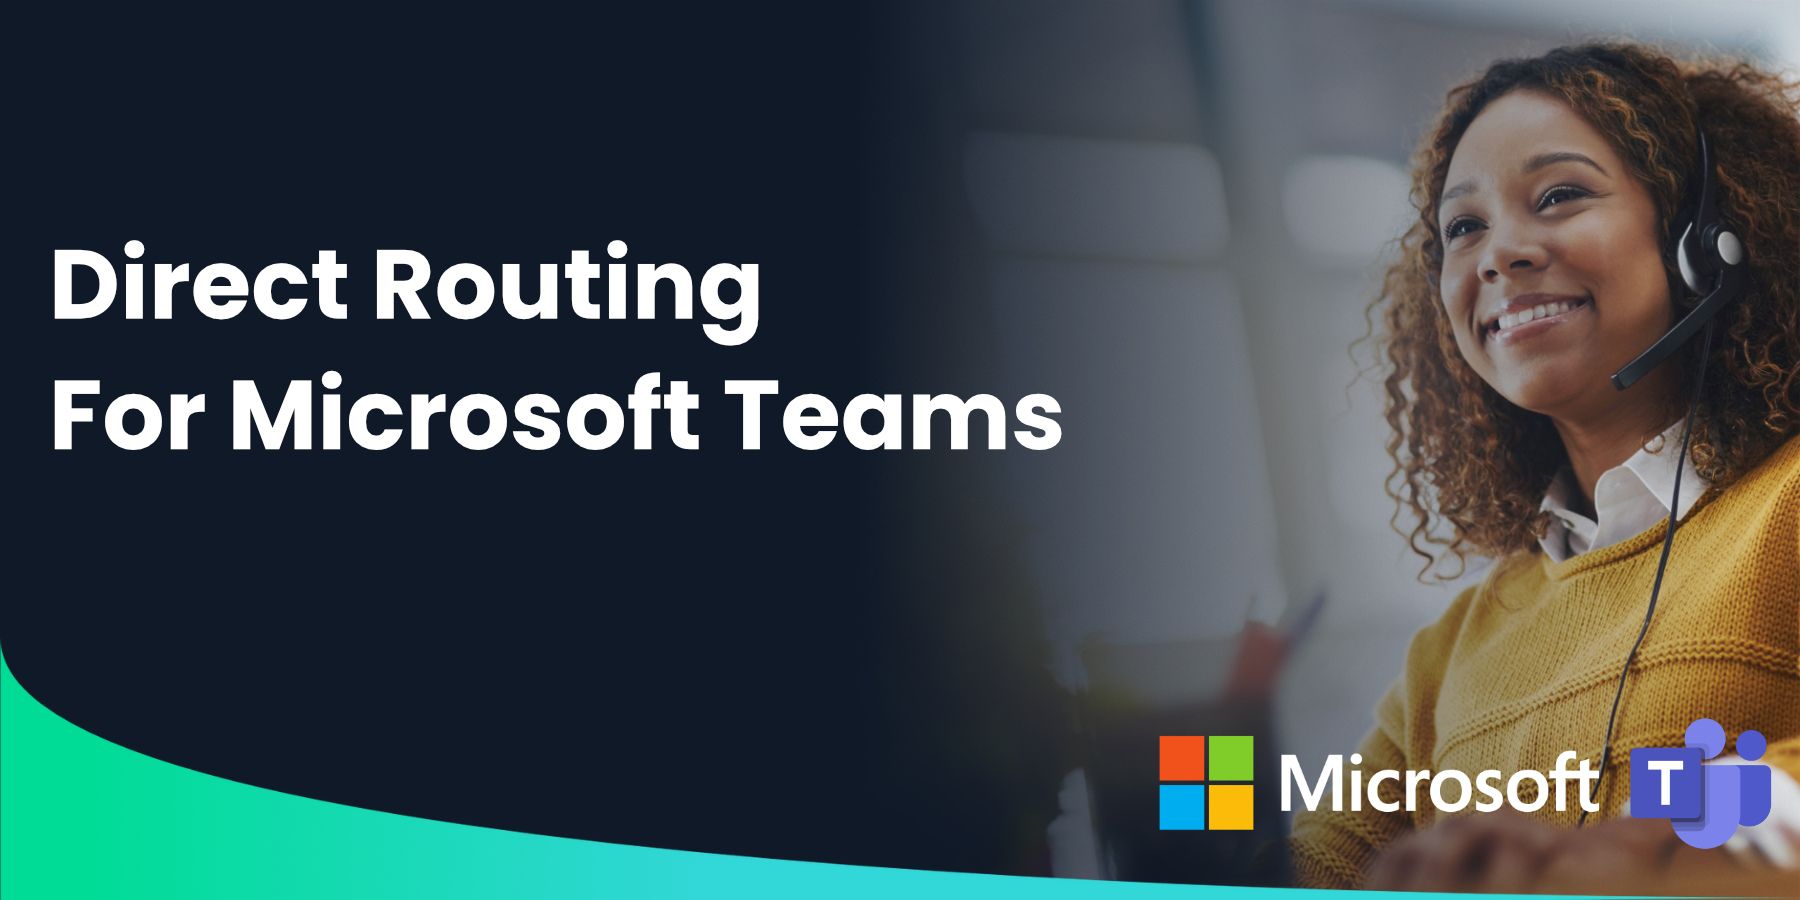 Featured image for “10 Benefits of Direct Routing for Microsoft Teams”